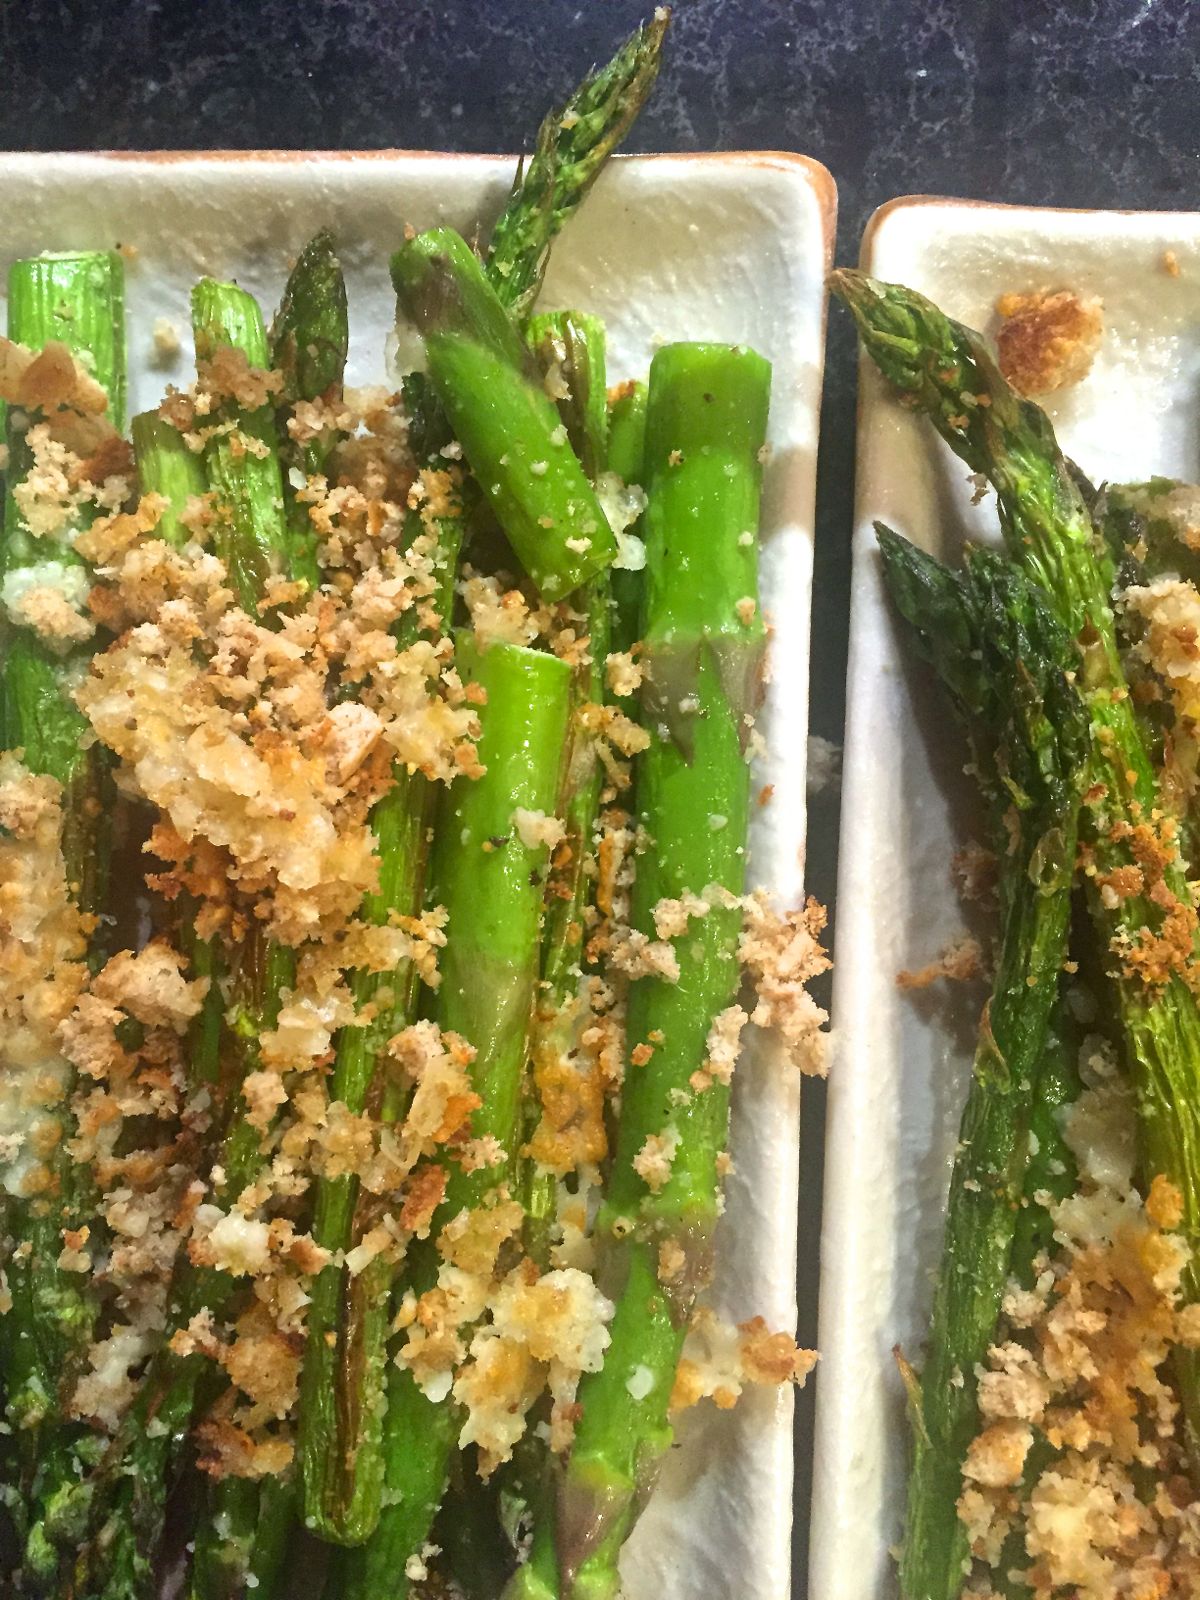 asparagus with Parmesan crumbs :: by radish*rose